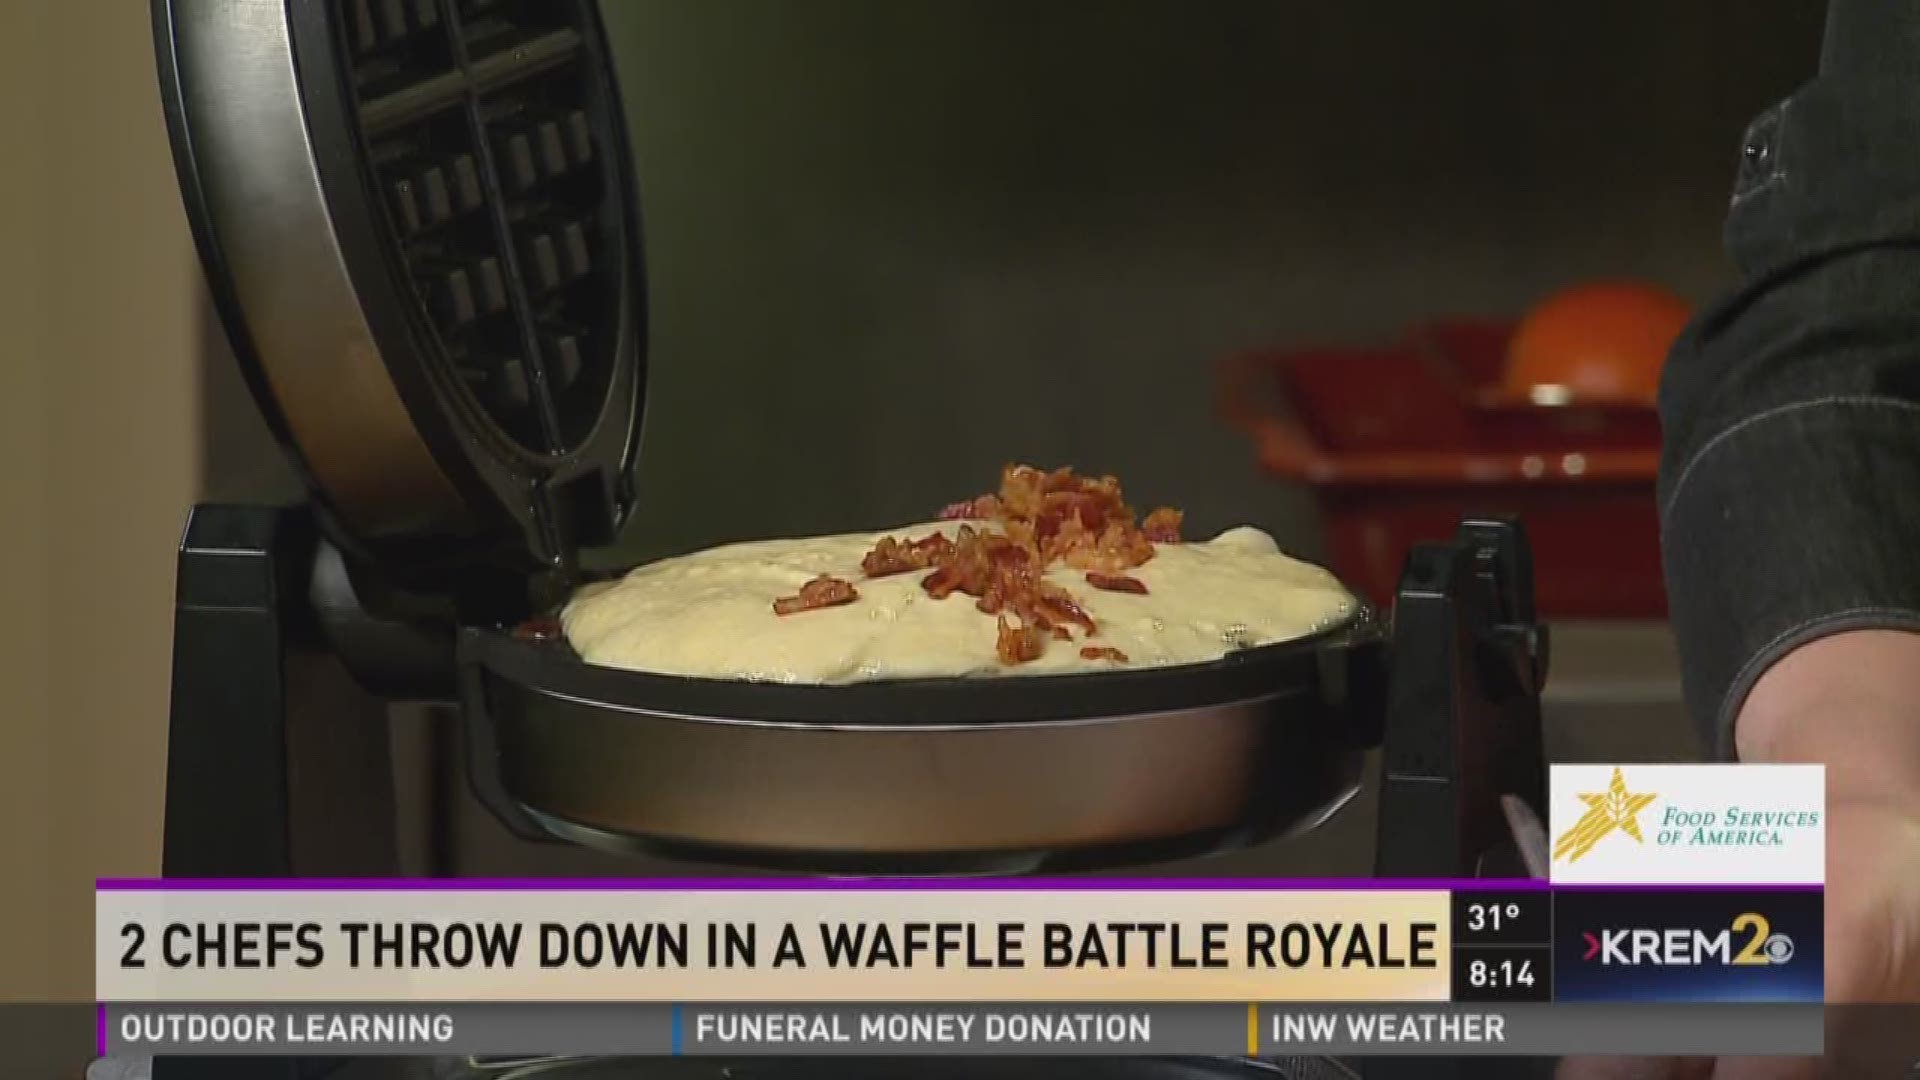 Two chefs throw down in a waffle battle royale  (1-10-18)